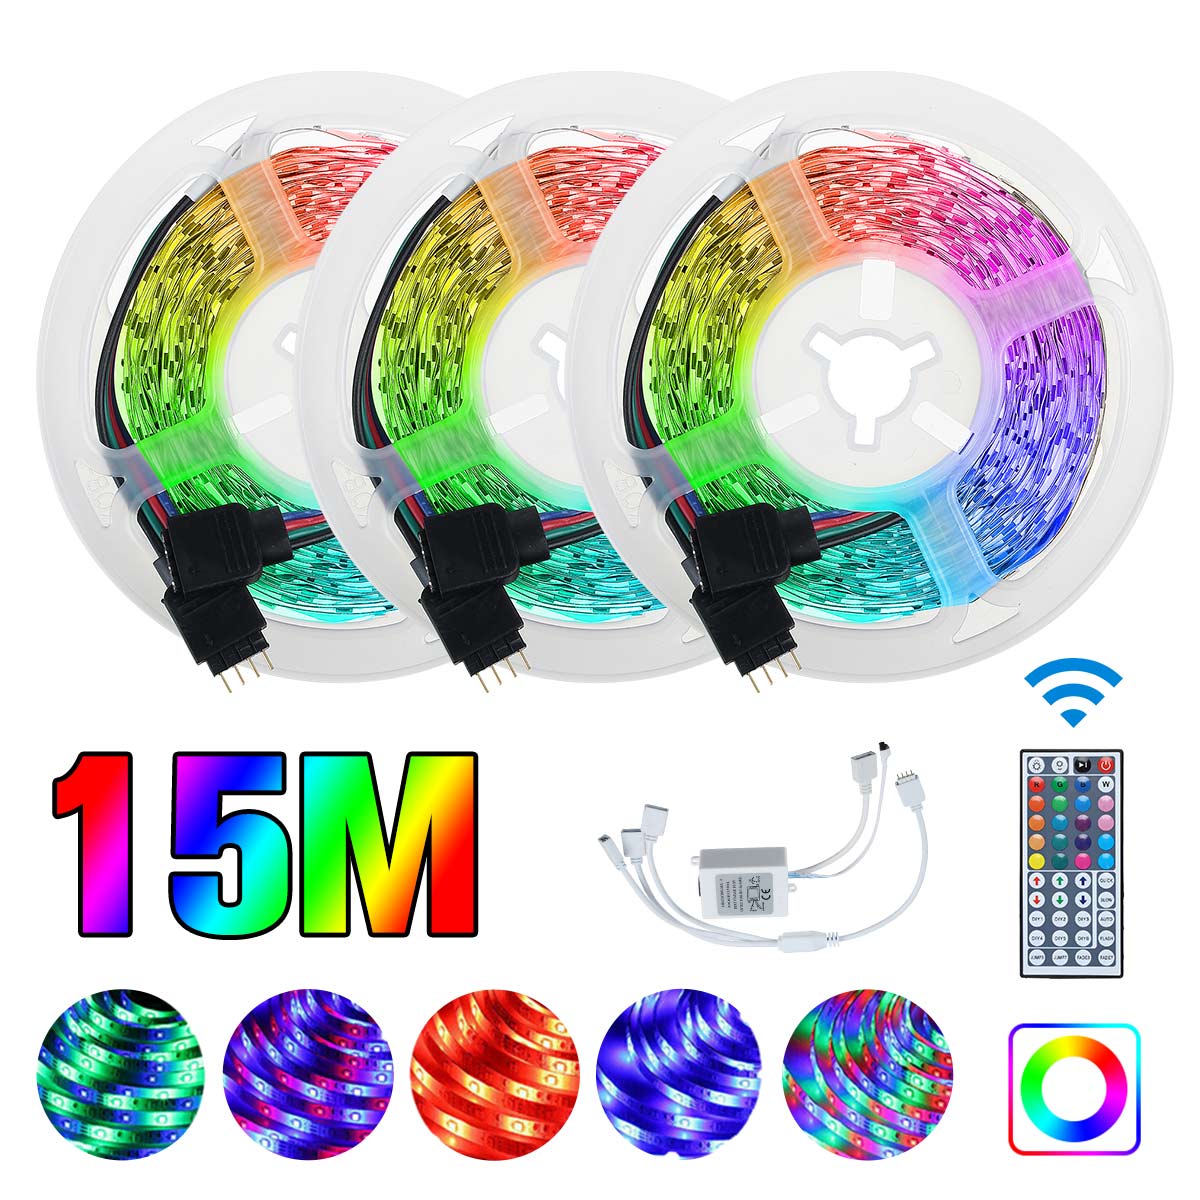 DC12V-3X5M10M-LED-Strip-Light-Non-waterproof-3528-RGB-Tape-Lamp-for-Room-TV-Party-Bar--Remote-Contro-1729474-3